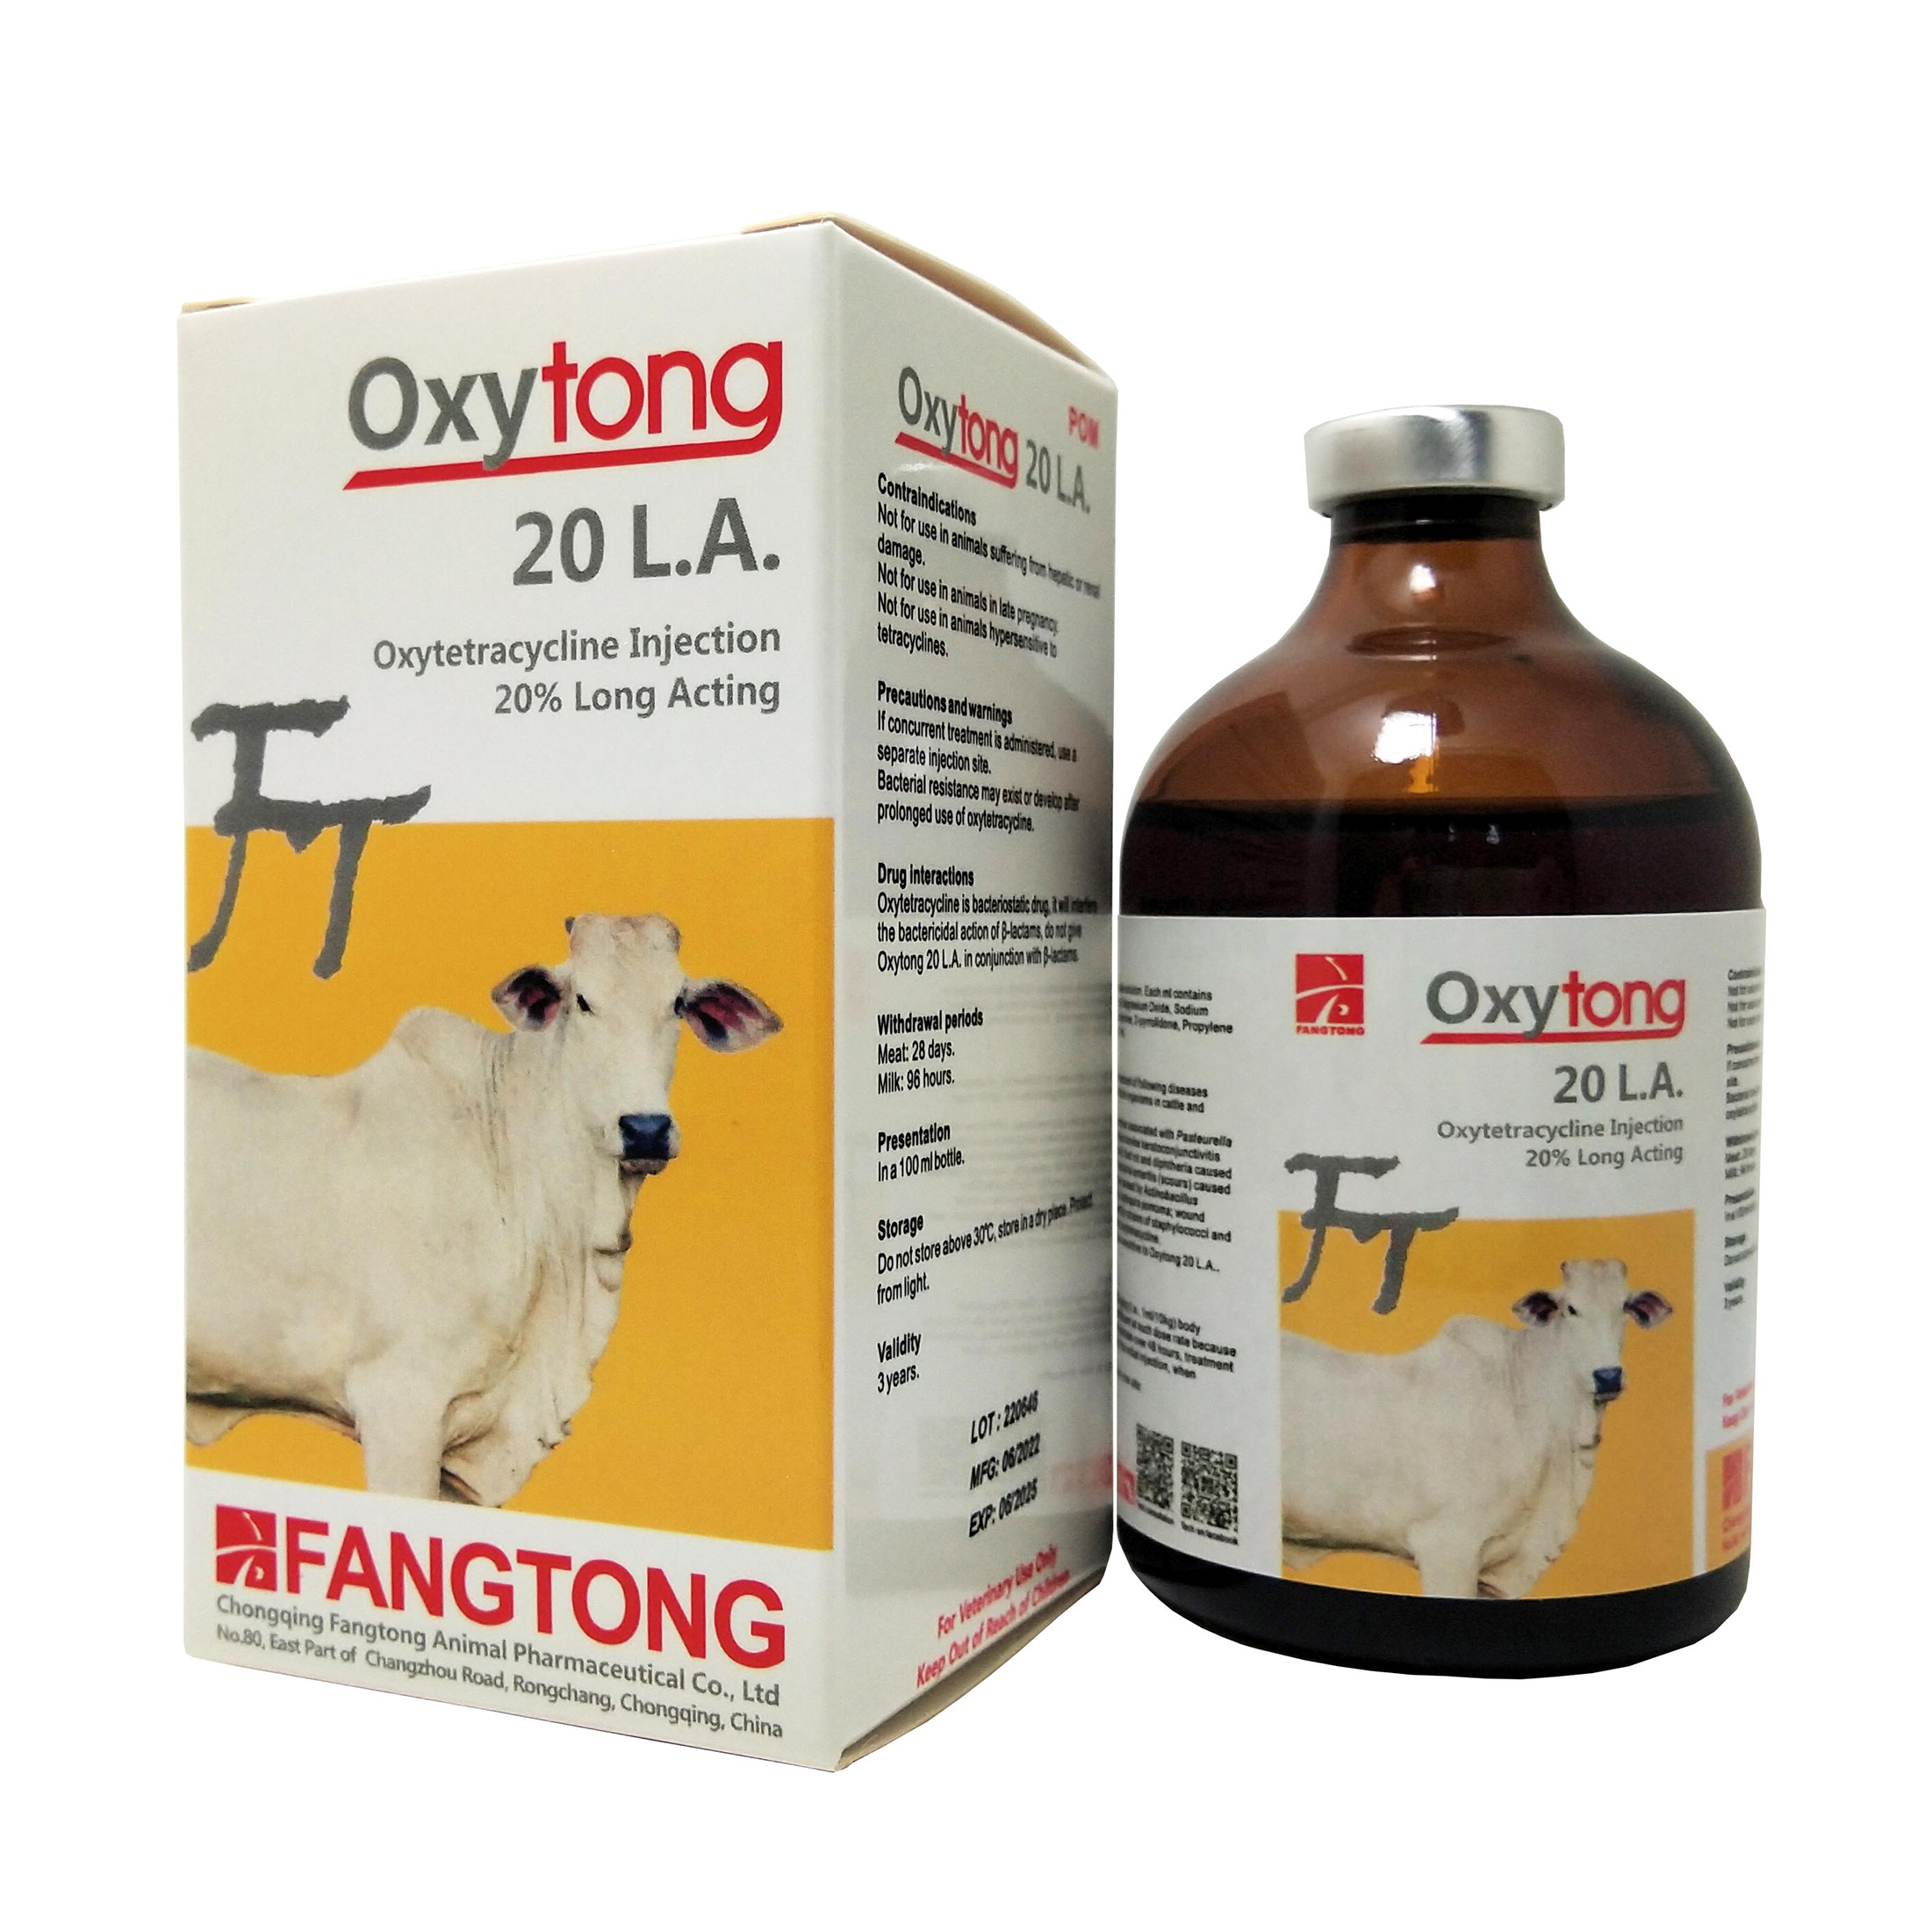 Oxytetracycline Injection 20% Long Acting Featured Image